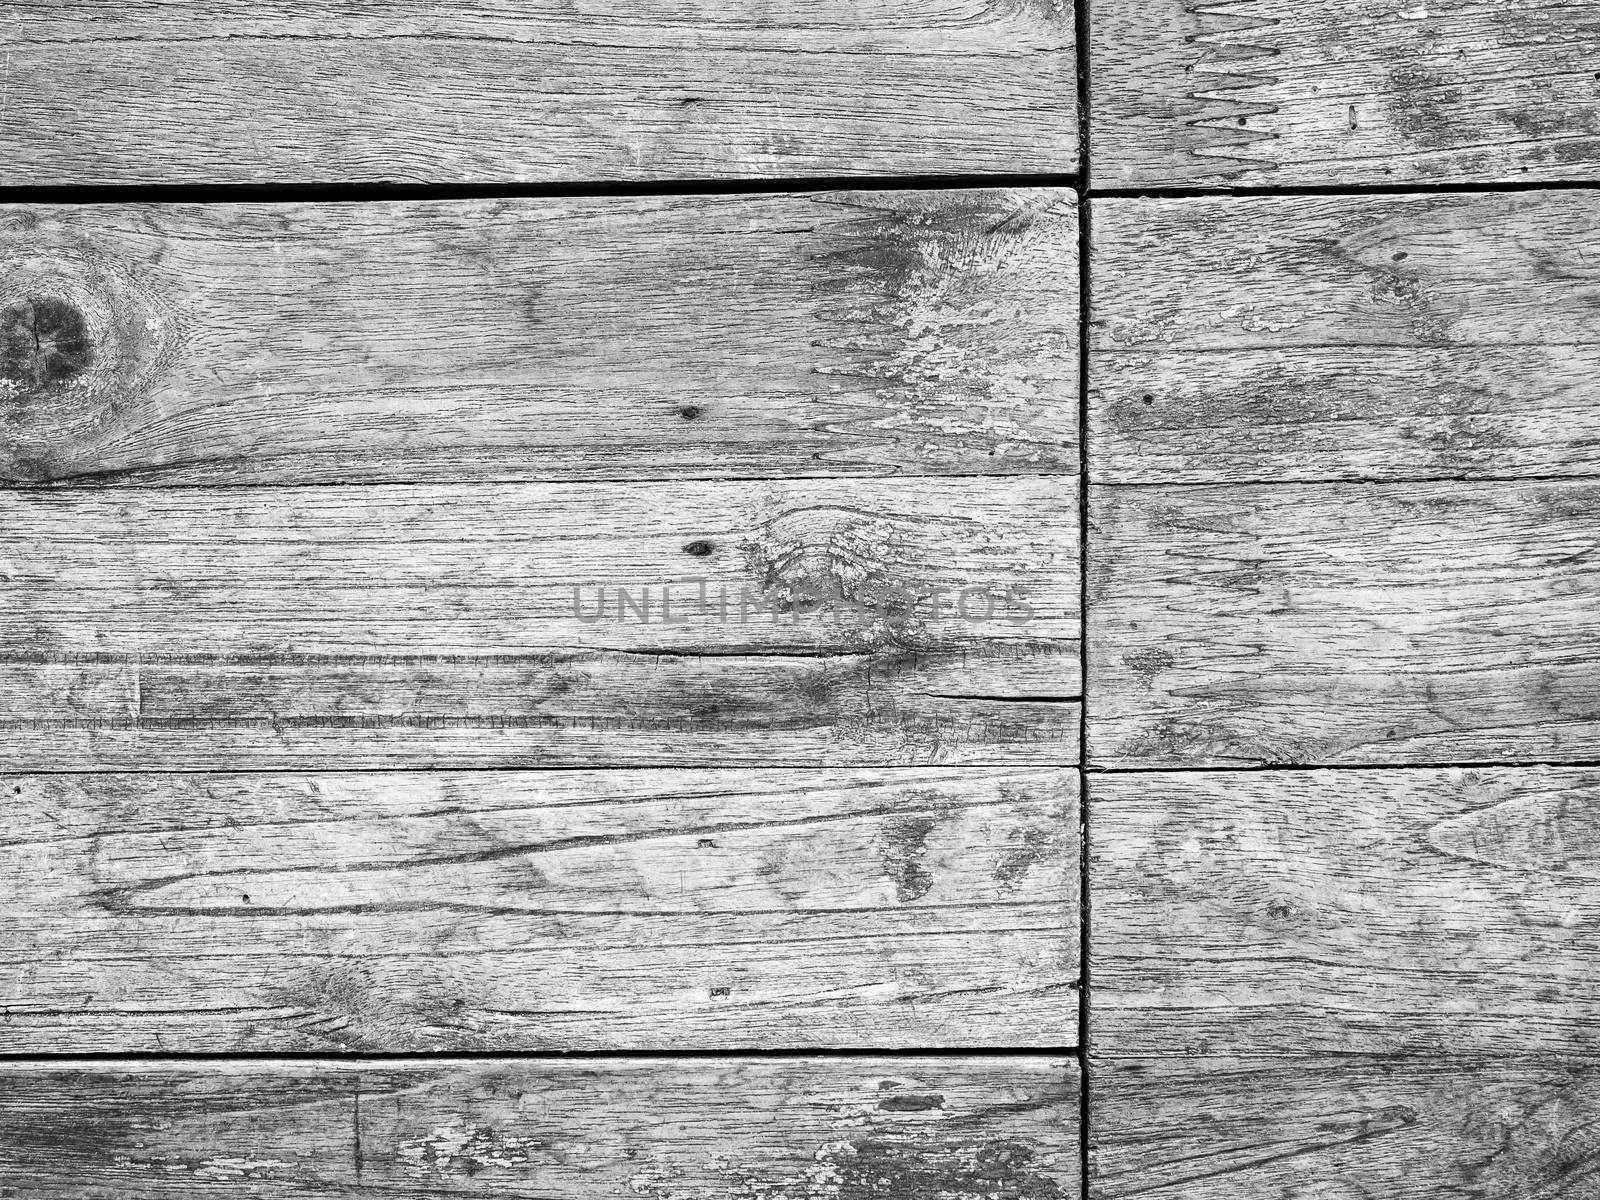 Black and white style wooden texture background. Grunge wood plank surface.